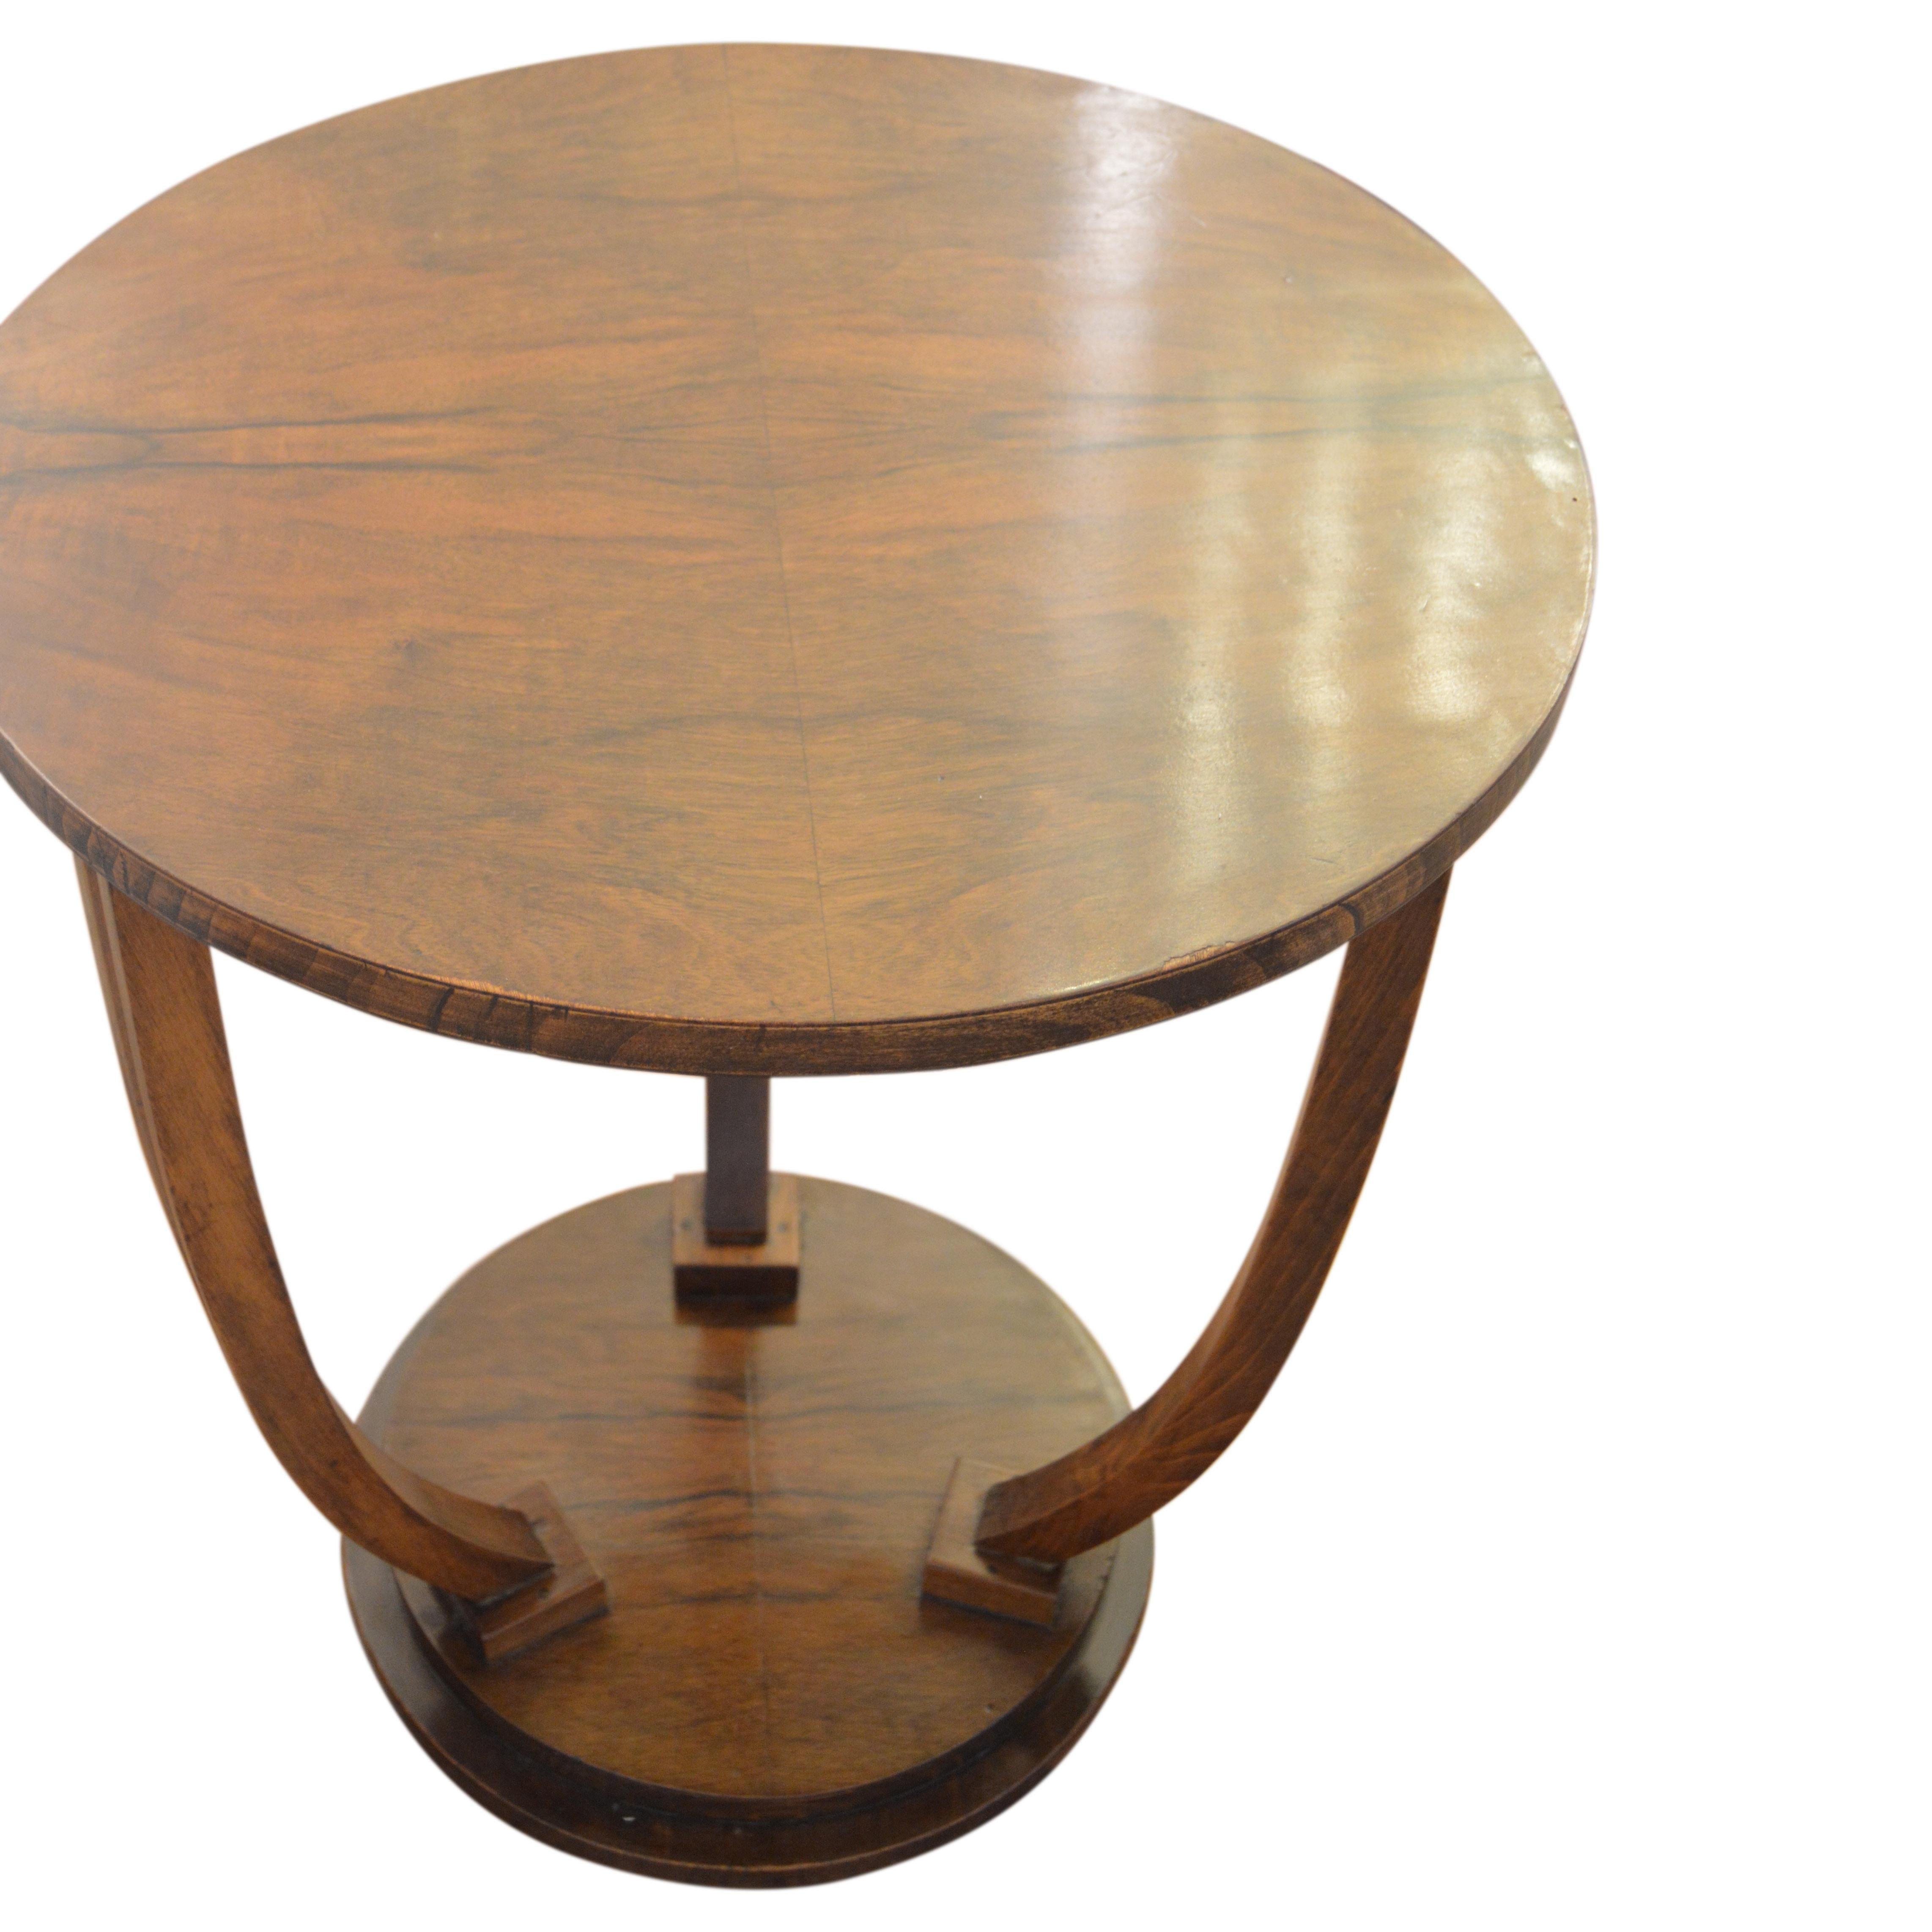 Beautiful Art Deco table from the 18th century perfect for the side of a sofa, in between chairs or bedside table.